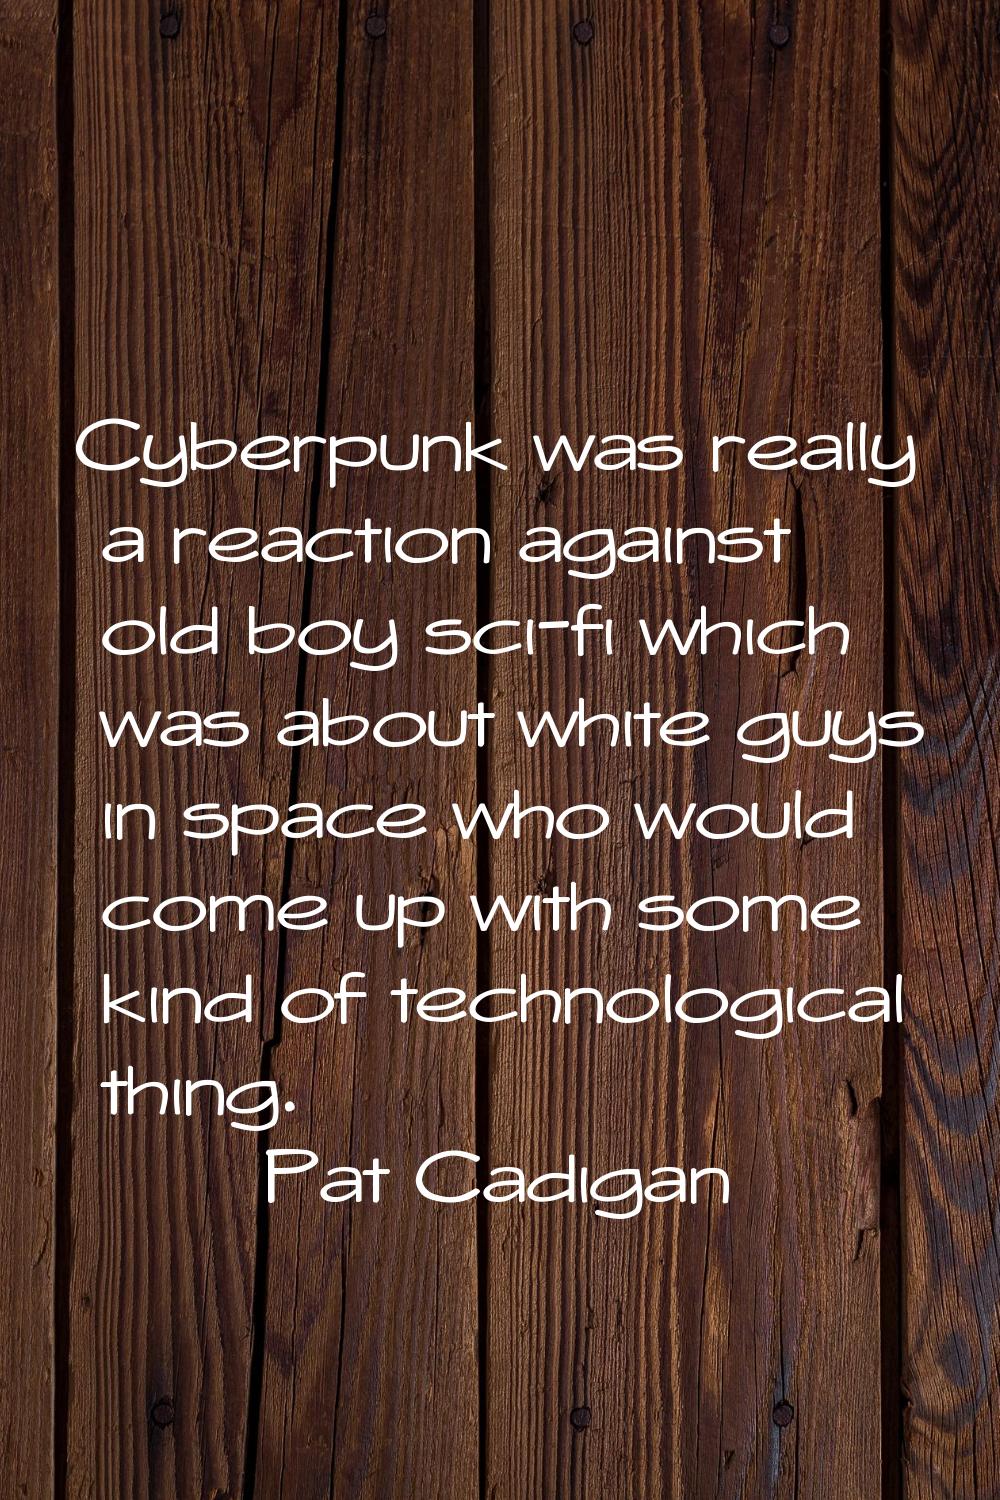 Cyberpunk was really a reaction against old boy sci-fi which was about white guys in space who woul